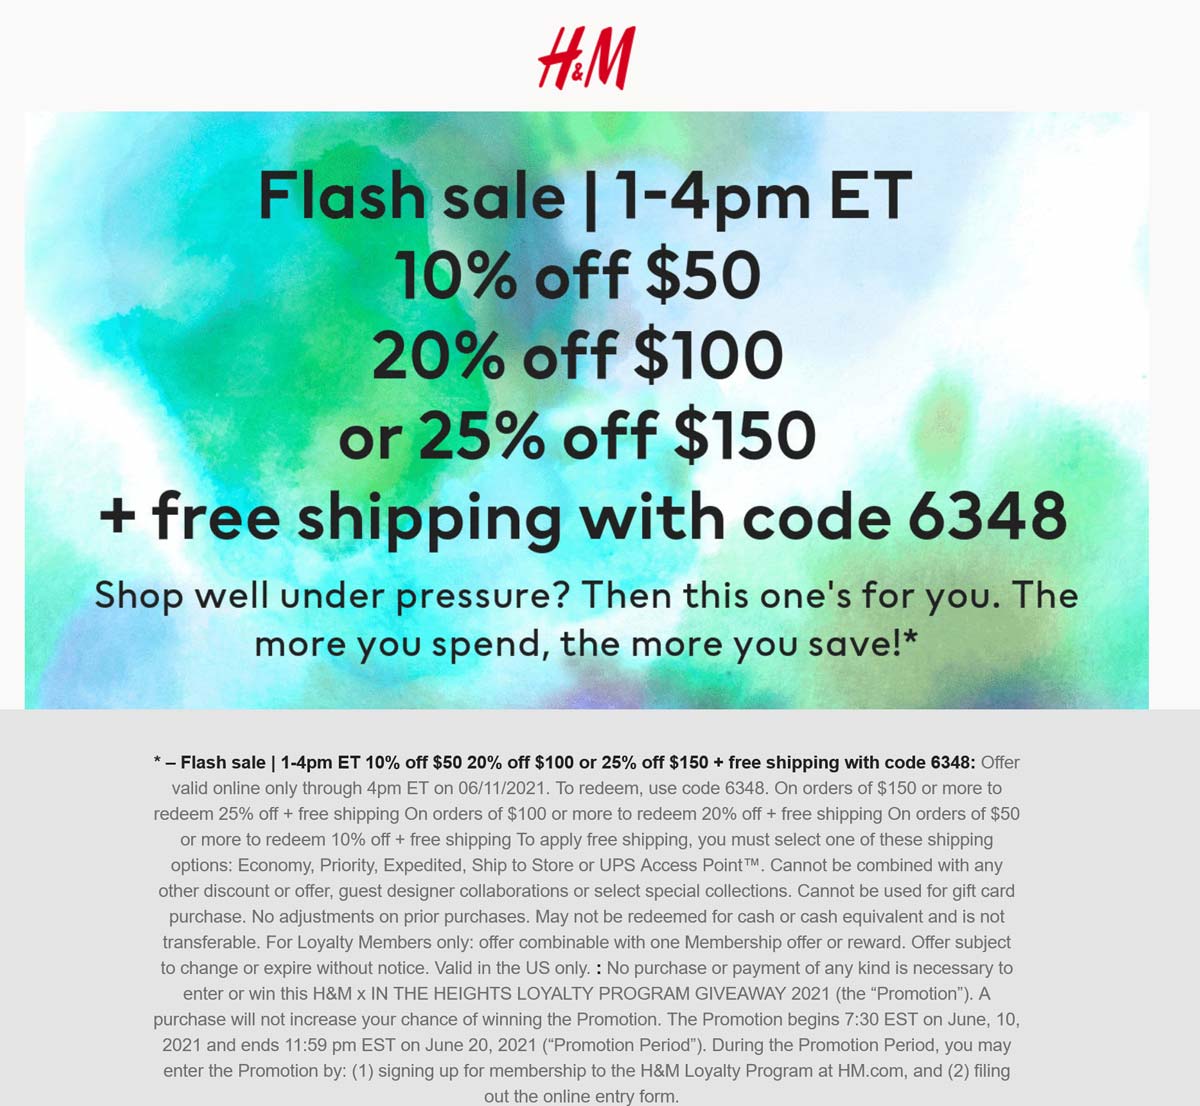 H&M stores Coupon  10-25% off $50+ til 4p today at H&M via promo code 6348 #hm 